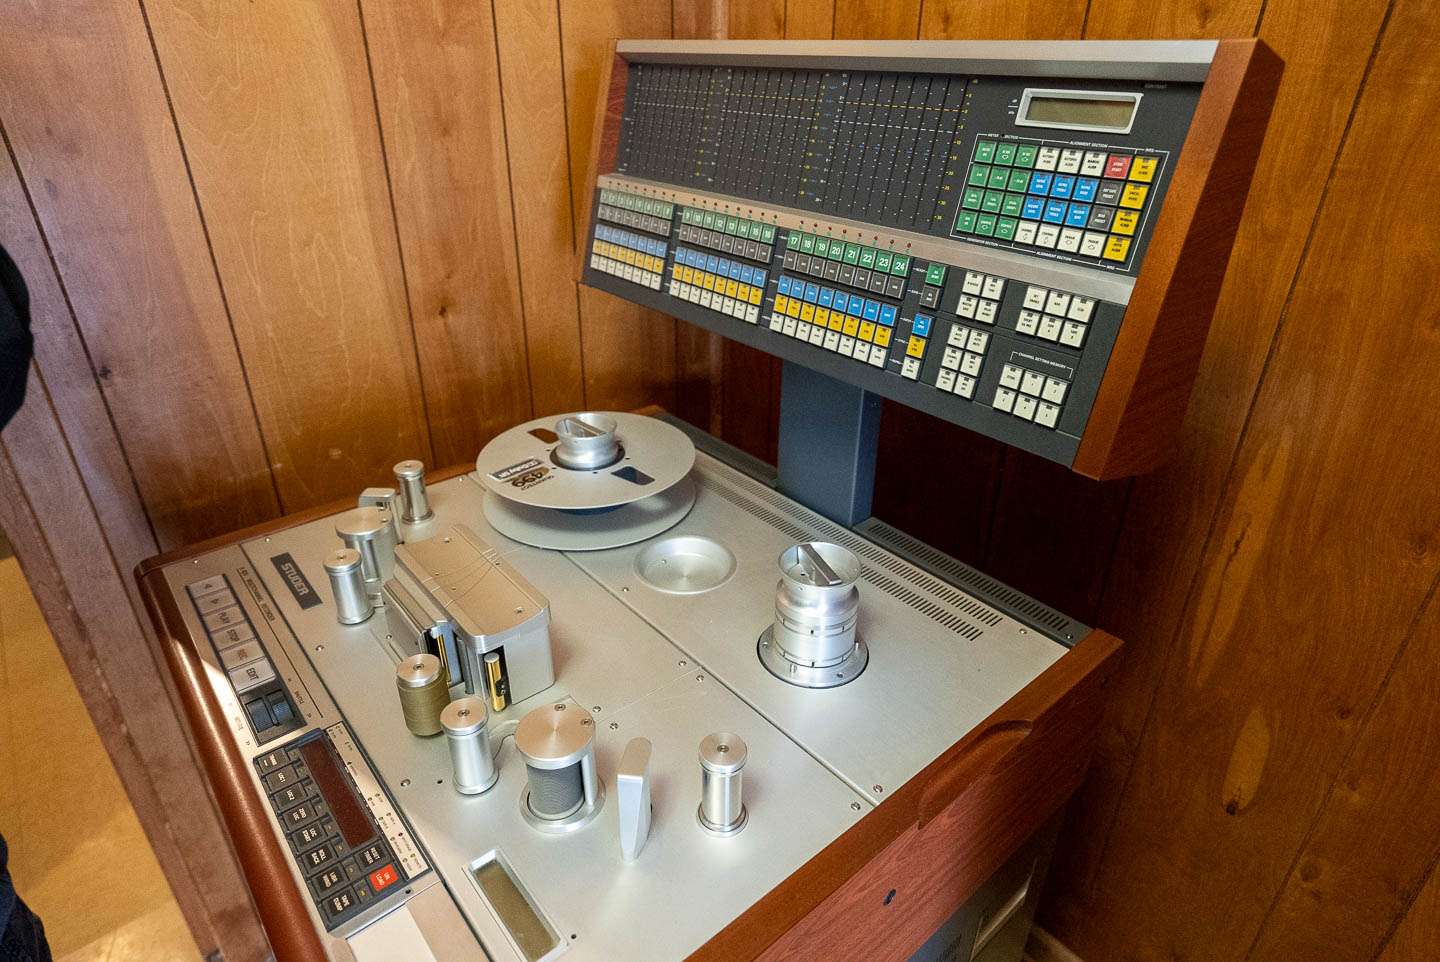 This old reel to reel machine is exactly like the ones used in the 1970s here. 